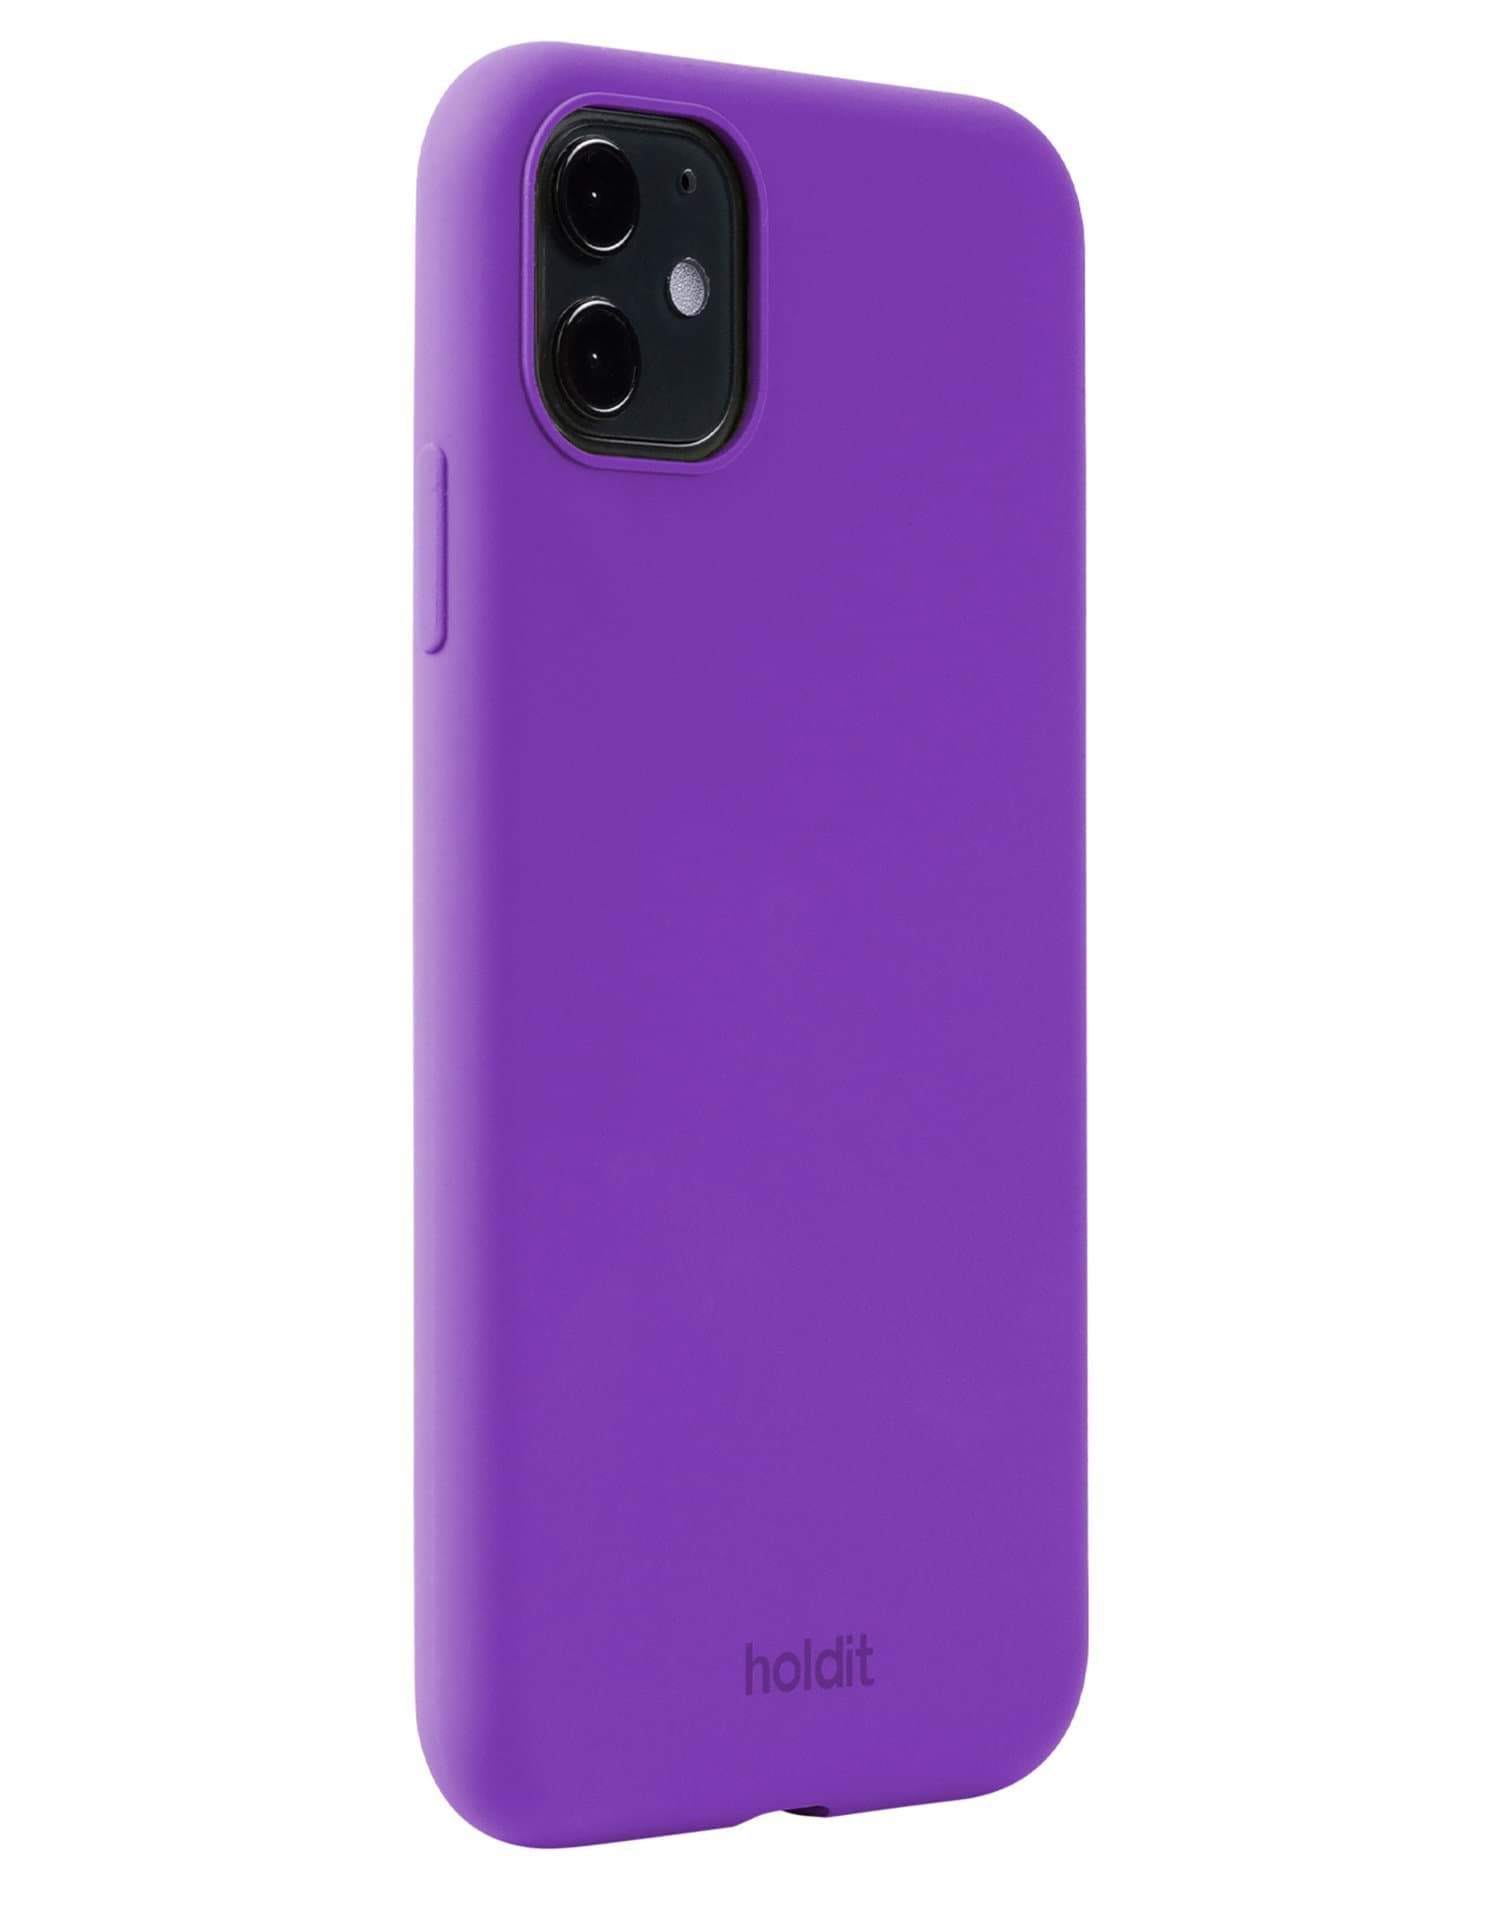 Silicone Case iPhone 11/XR